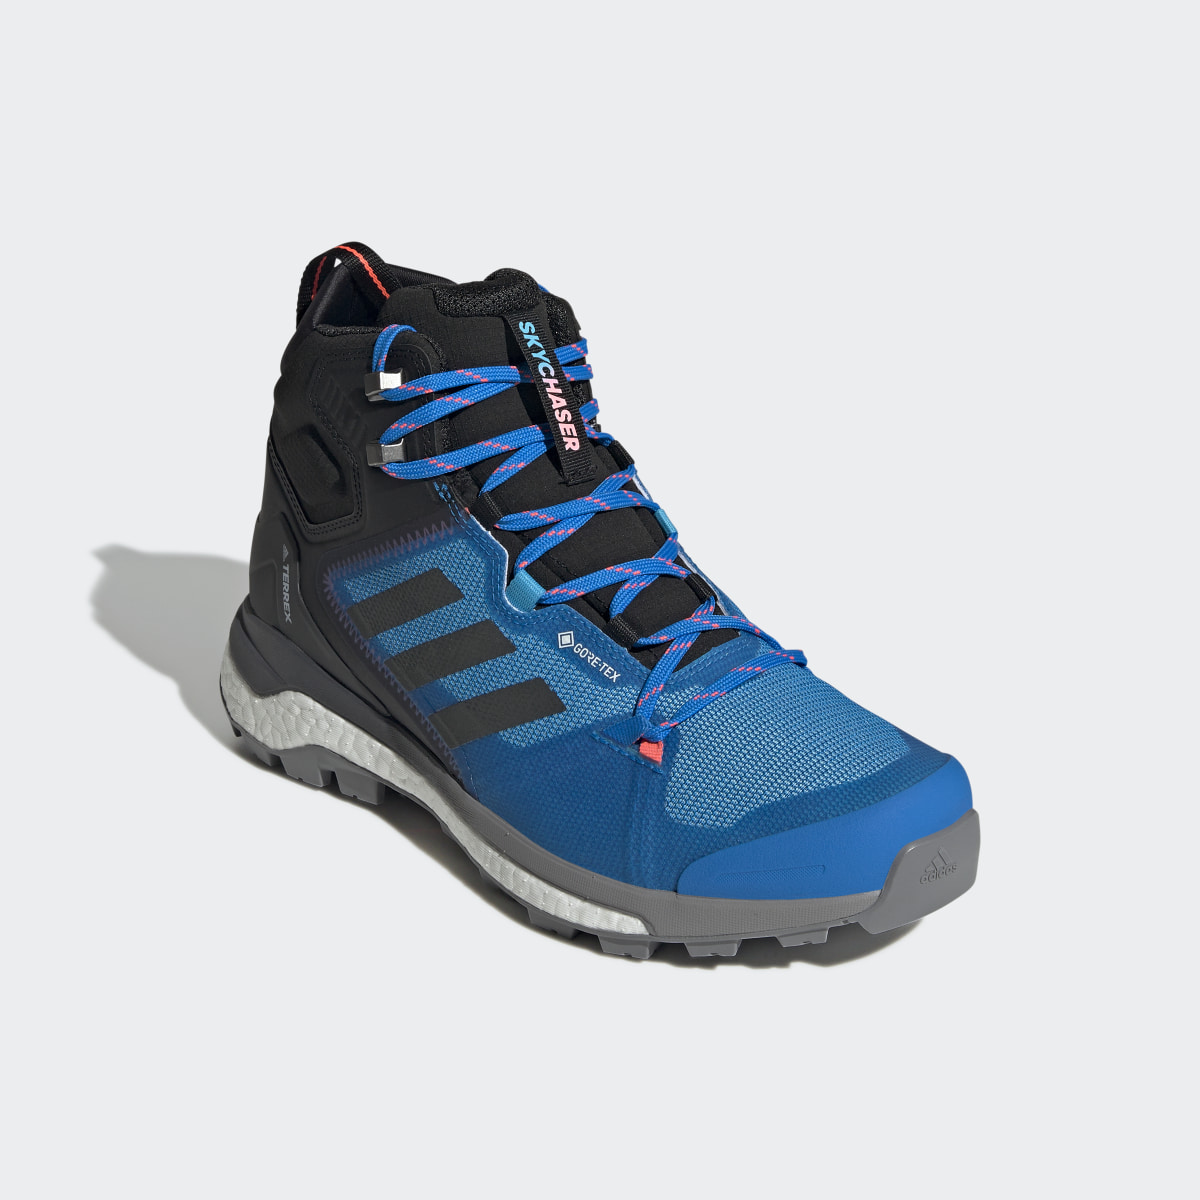 Adidas TERREX Skychaser 2 Mid GORE-TEX Hiking Shoes. 11